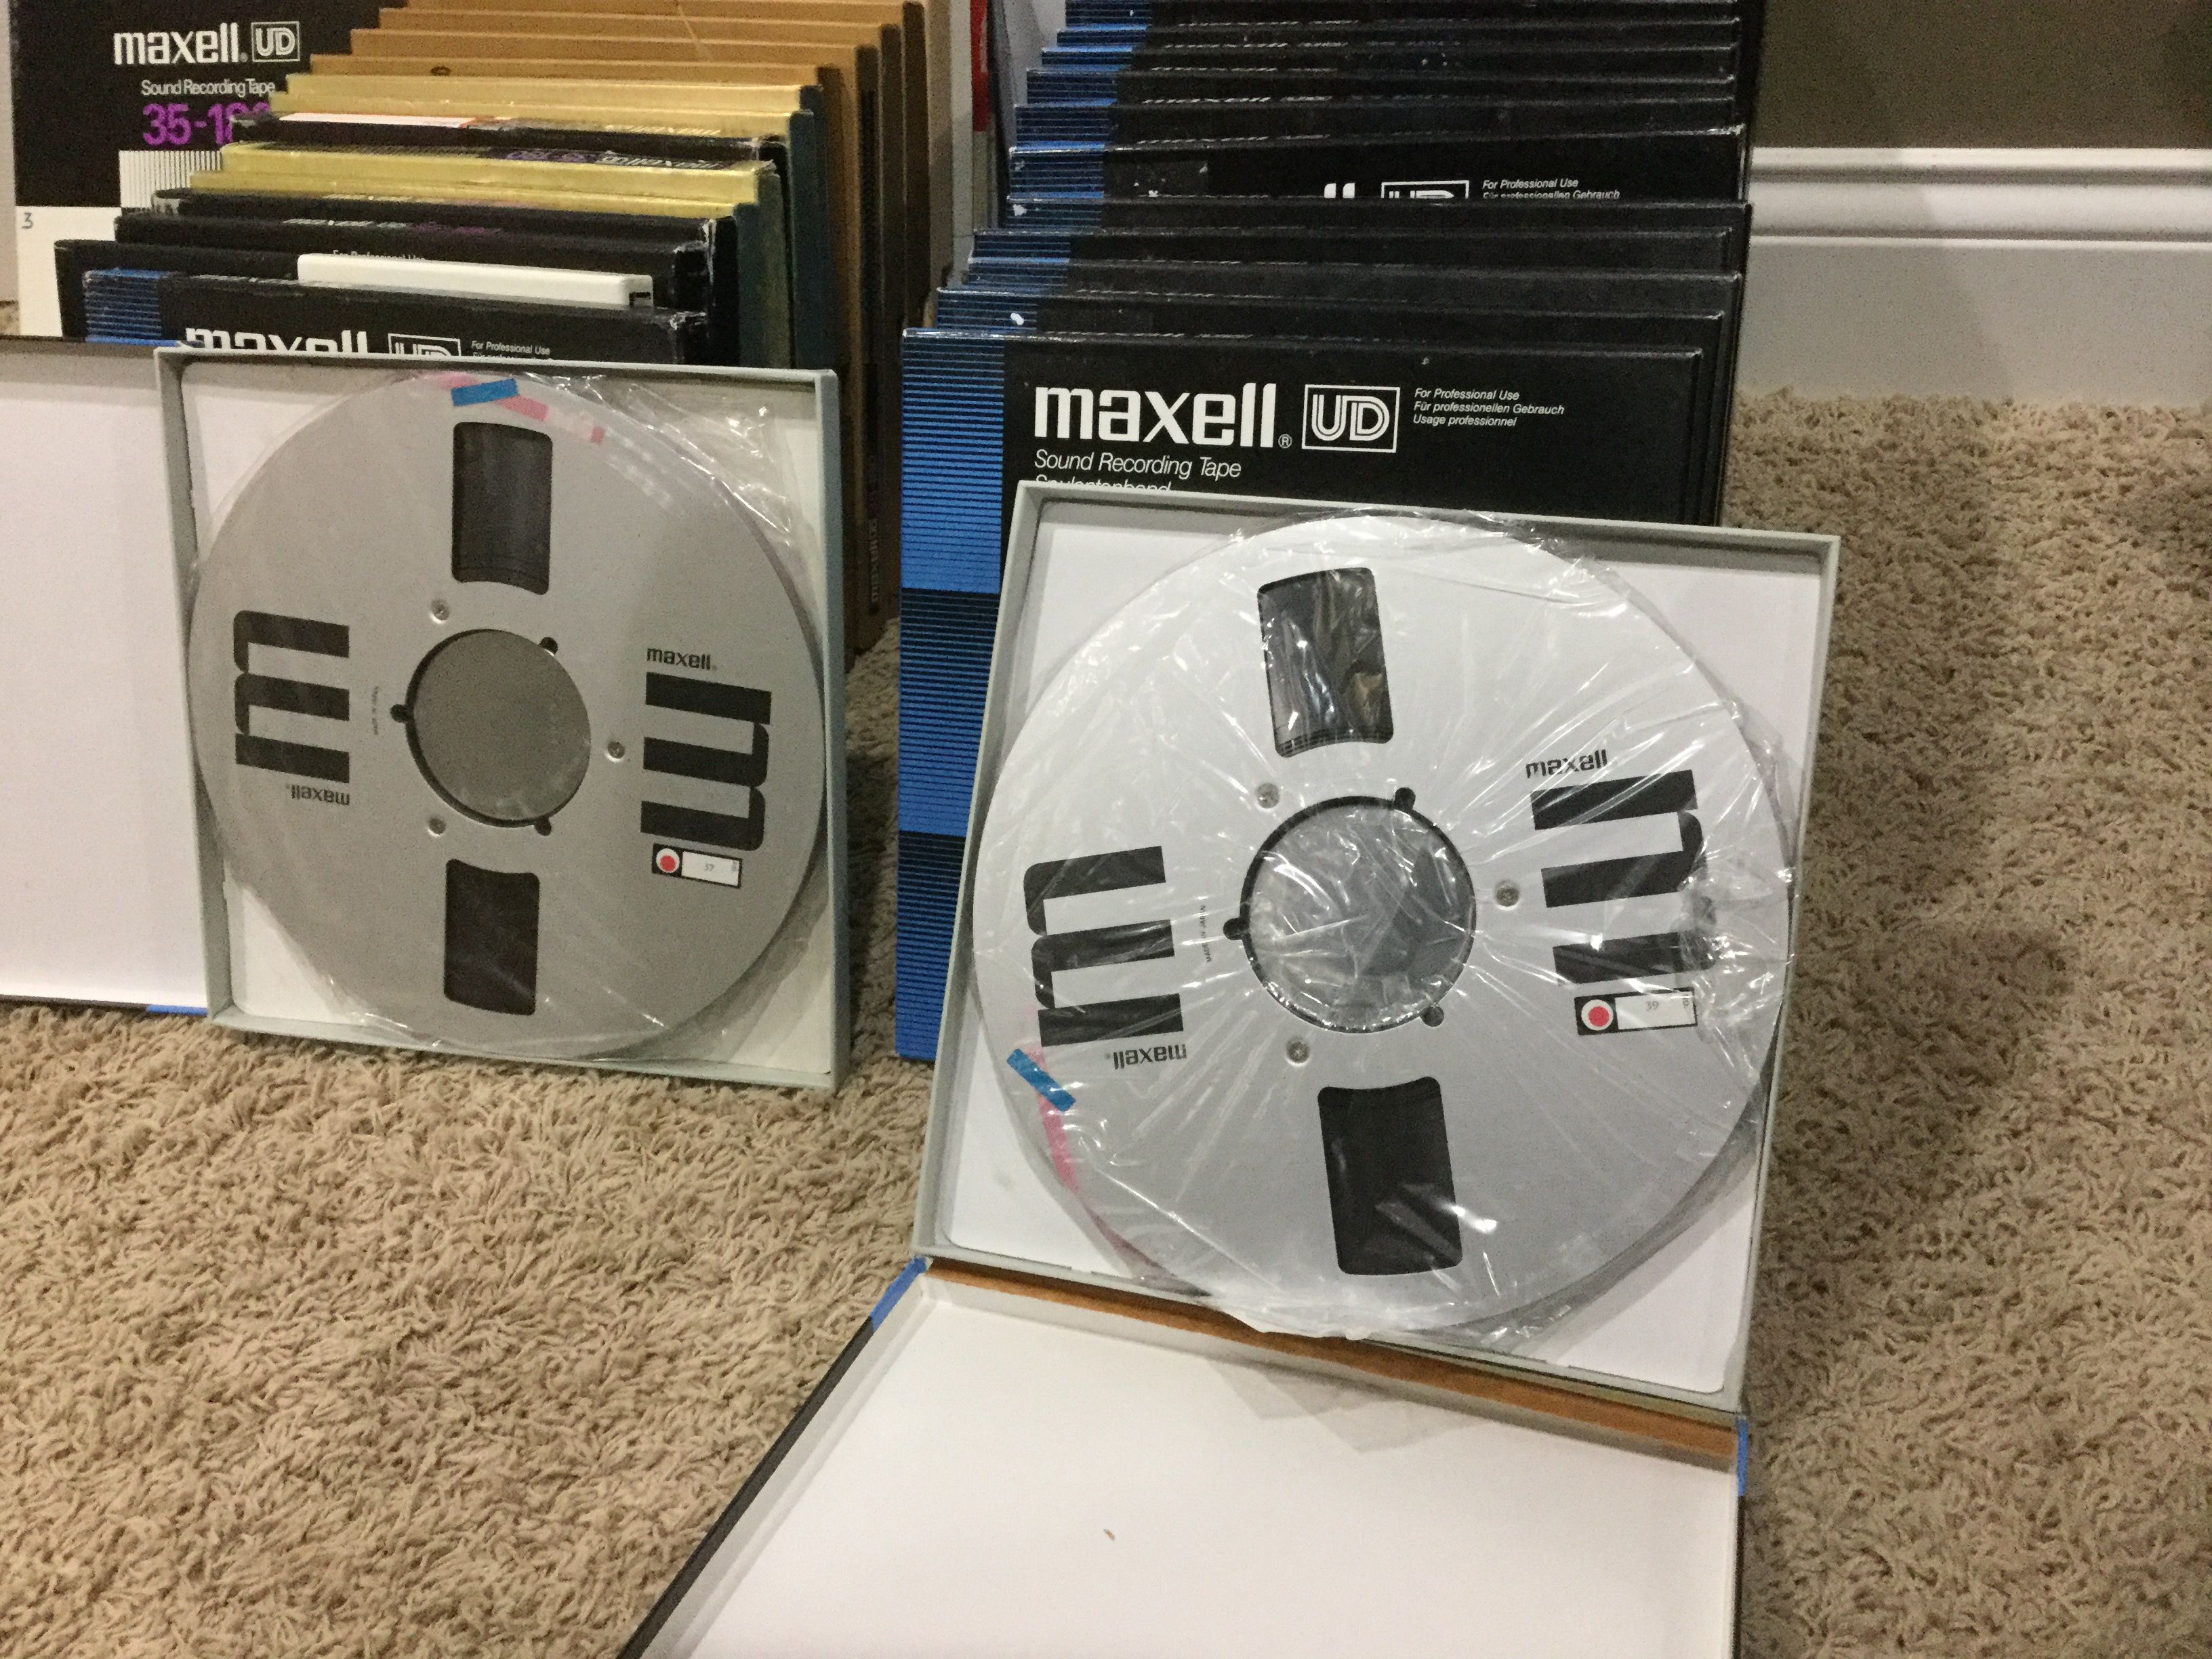 FS:Maxell ud-35-180 10.5 reel to reel tape Sold - Garage Sale - The Klipsch  Audio Community